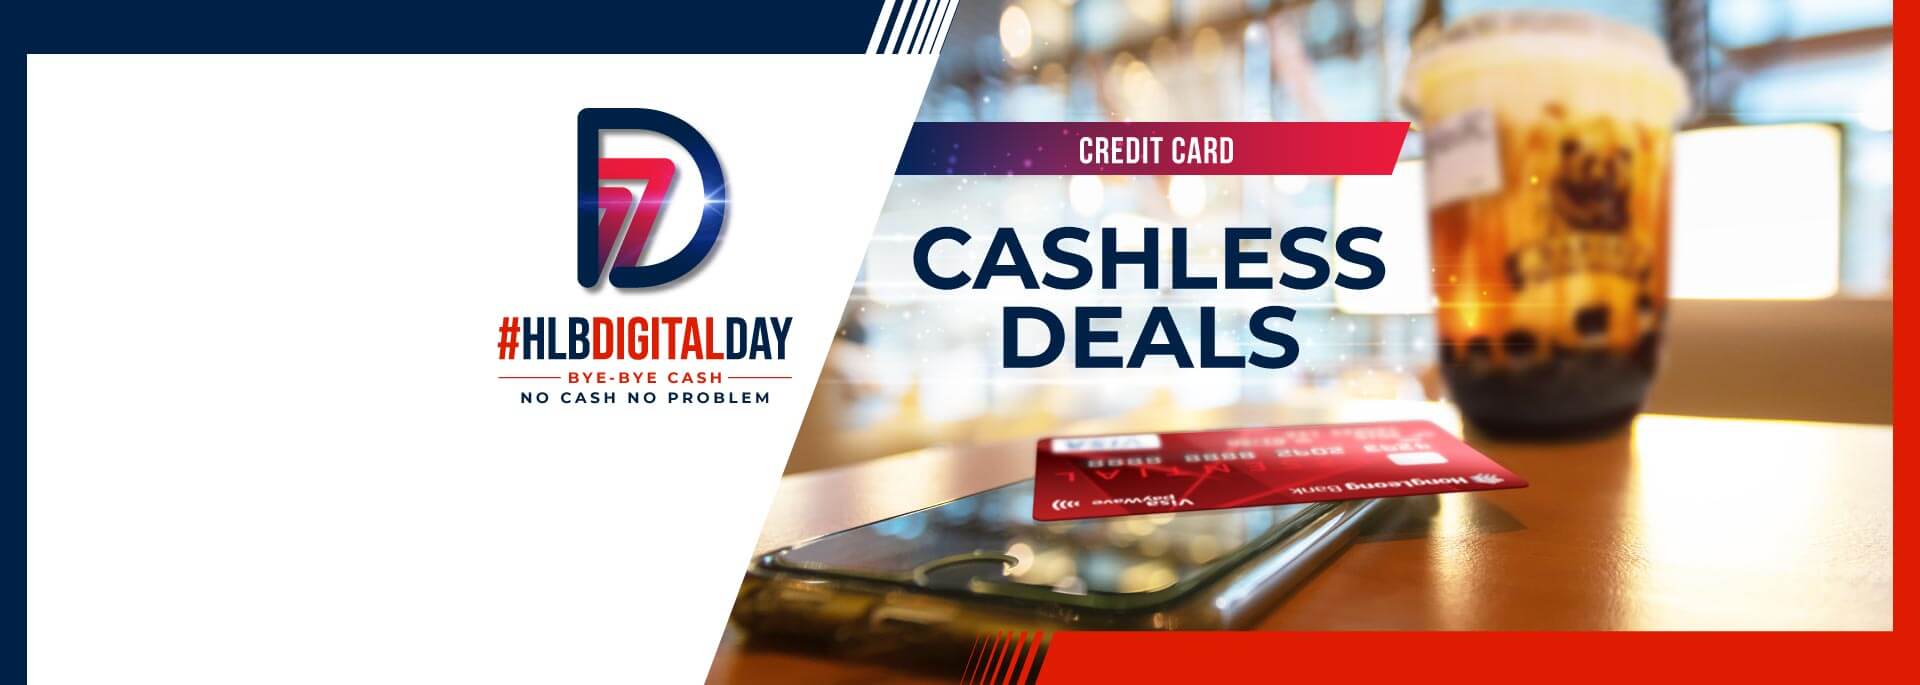 Promotions | Go cashless, get rewarded when you spend with ...